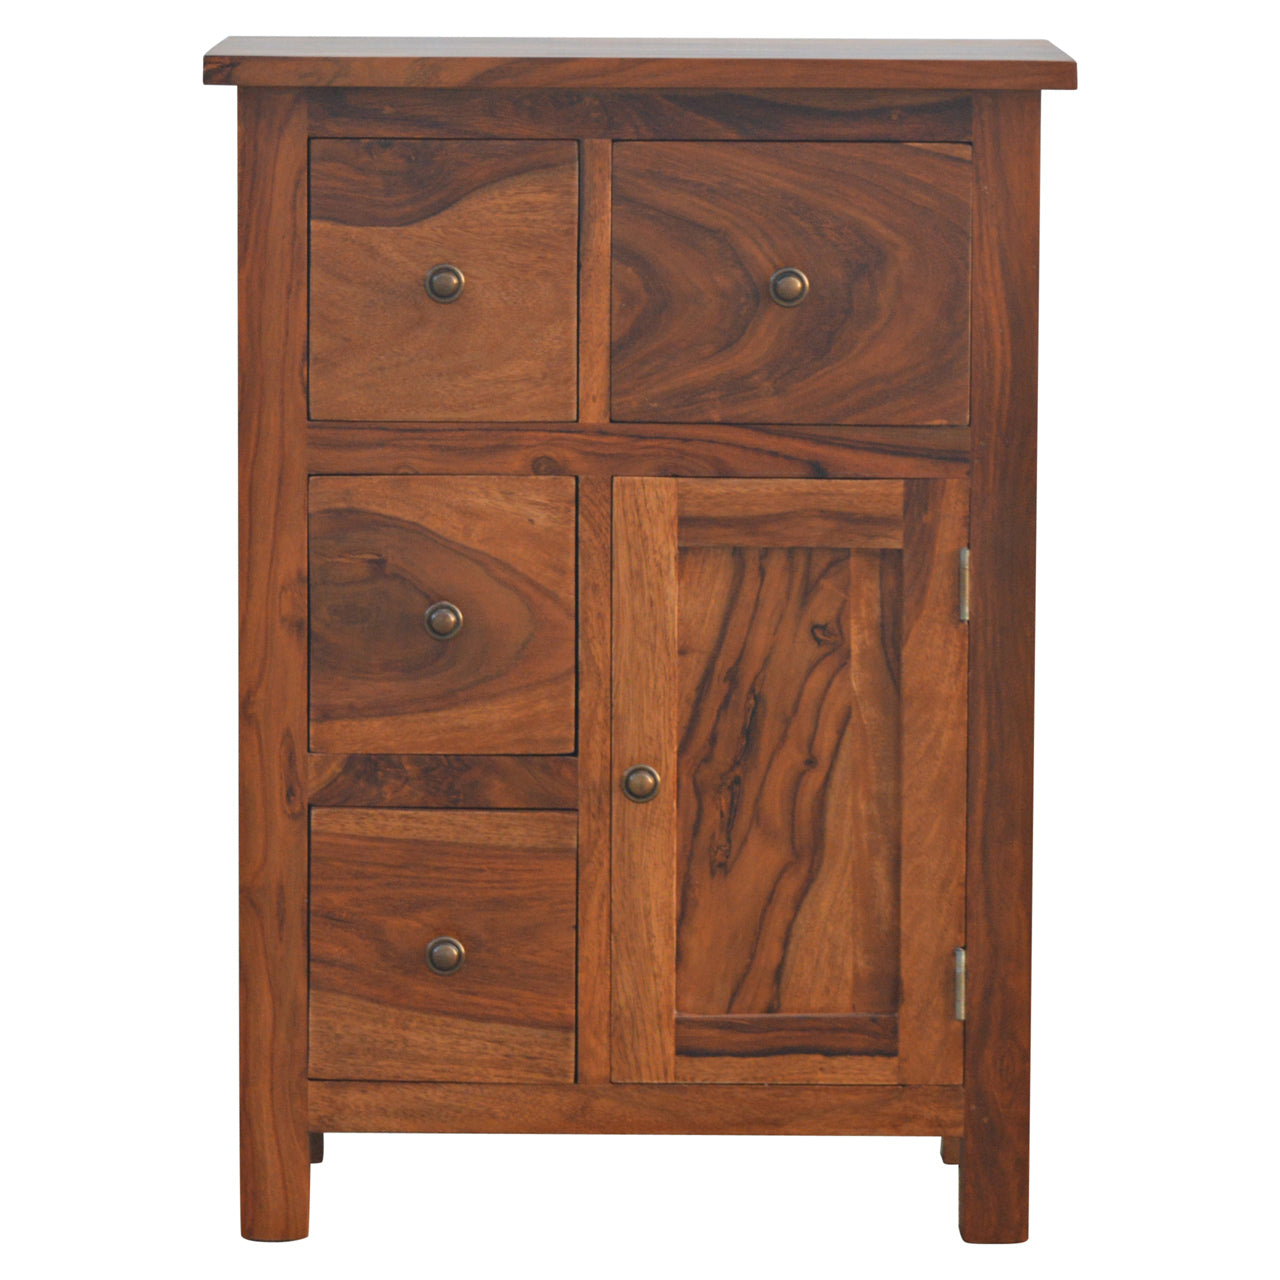 View Sheesham Wood Cabinet with 4 Drawers and 1 Door information